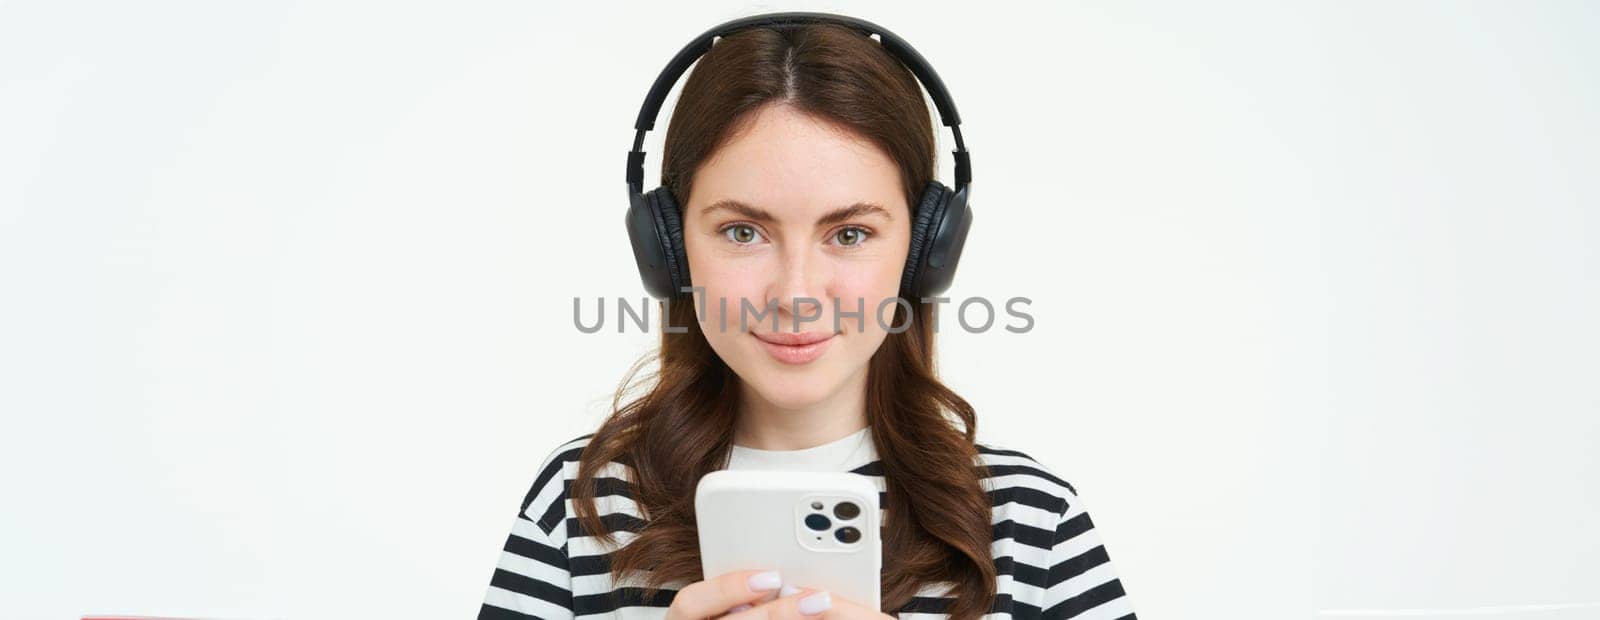 Image of brunette young woman, smiling, listening to music in headphones, watching videos on mobile phone app, holding smartphone, standing over white background.